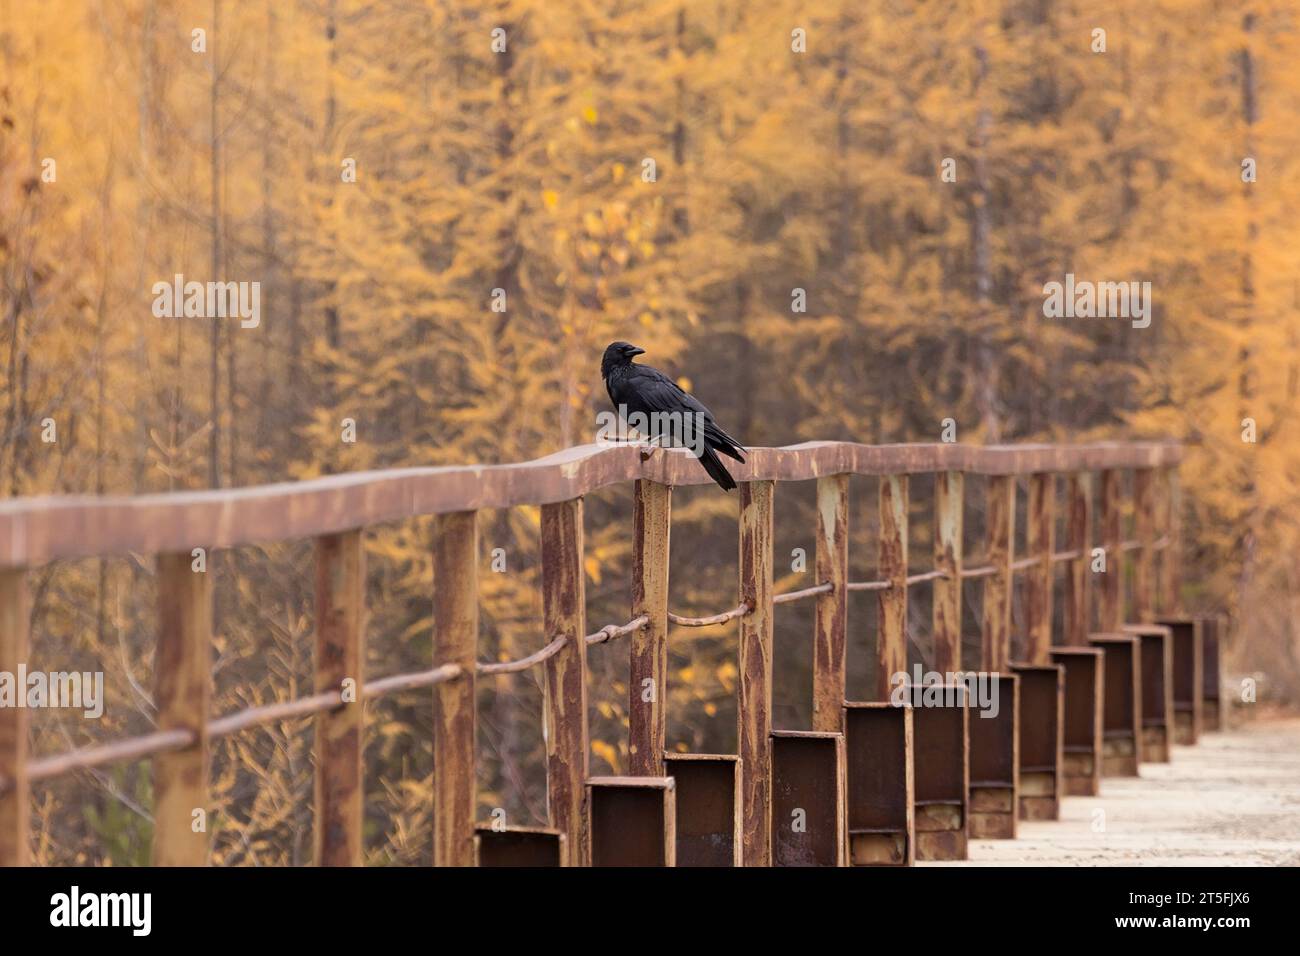 A black raven sits on an old metal fence against the background of a yellow autumn forest Stock Photo